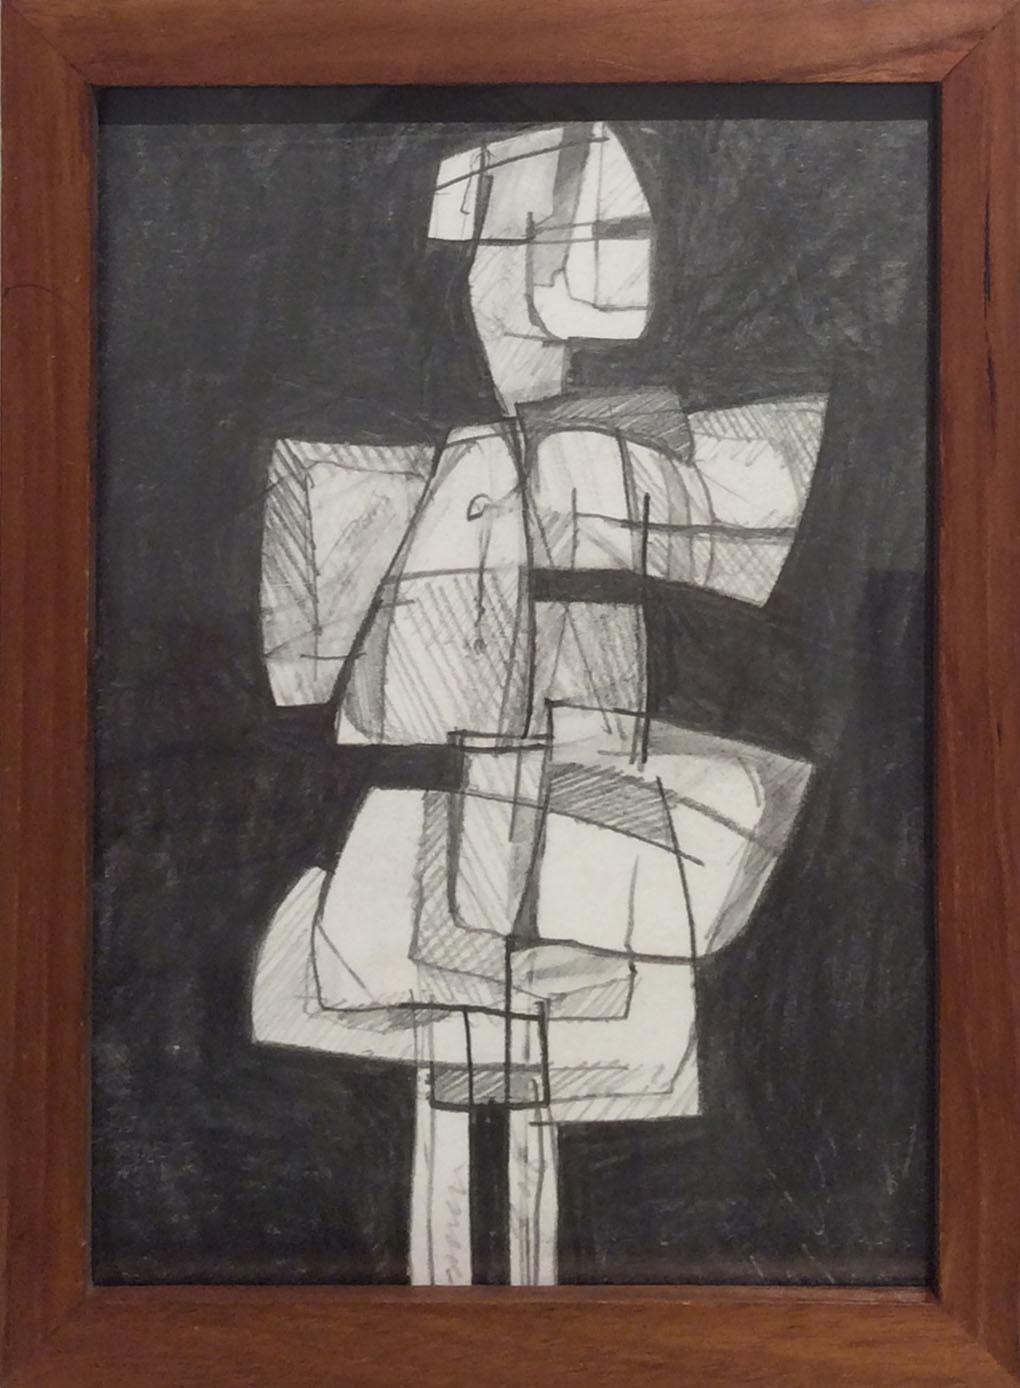 David Dew Bruner Abstract Drawing - Infanta XLIX: Figurative Cubist Style Abstract Geometric Graphite Drawing